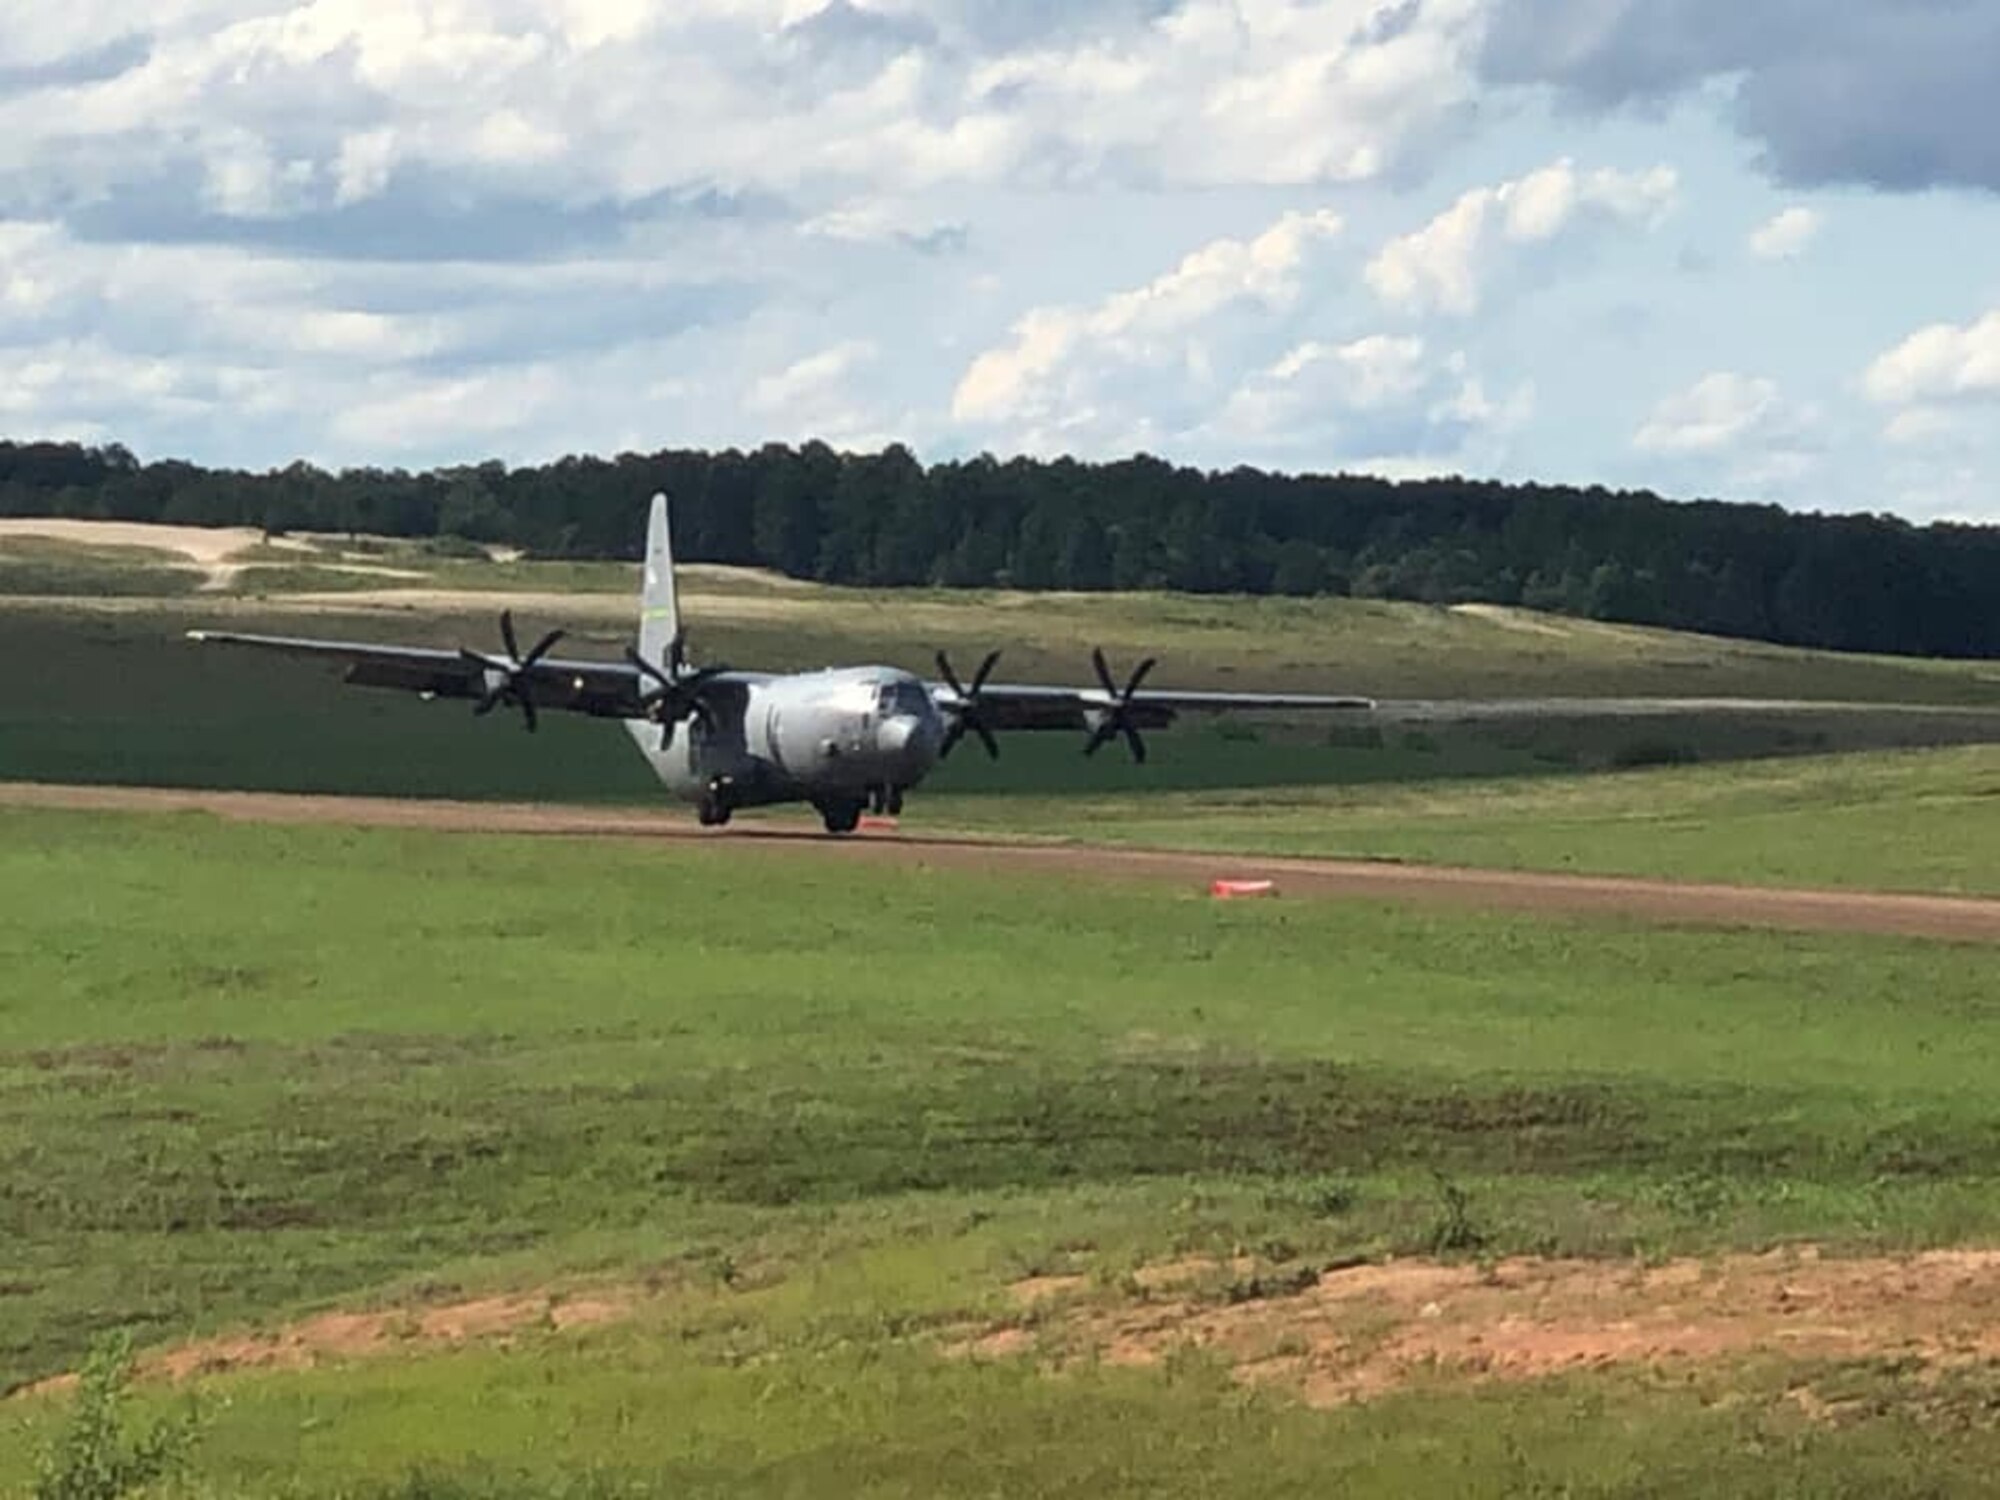 A C-130J Super Hercules aircraft from Little Rock Air Force Base, Arkansas, departs Geronimo Landing Zone in support of airborne operations at the Joint Readiness Training Center in Fort Polk, Louisiana, May 26, 2020. LRAFB aircraft conducted parachute operations from dirt assault runways May 26-28. (Courtesy photo)